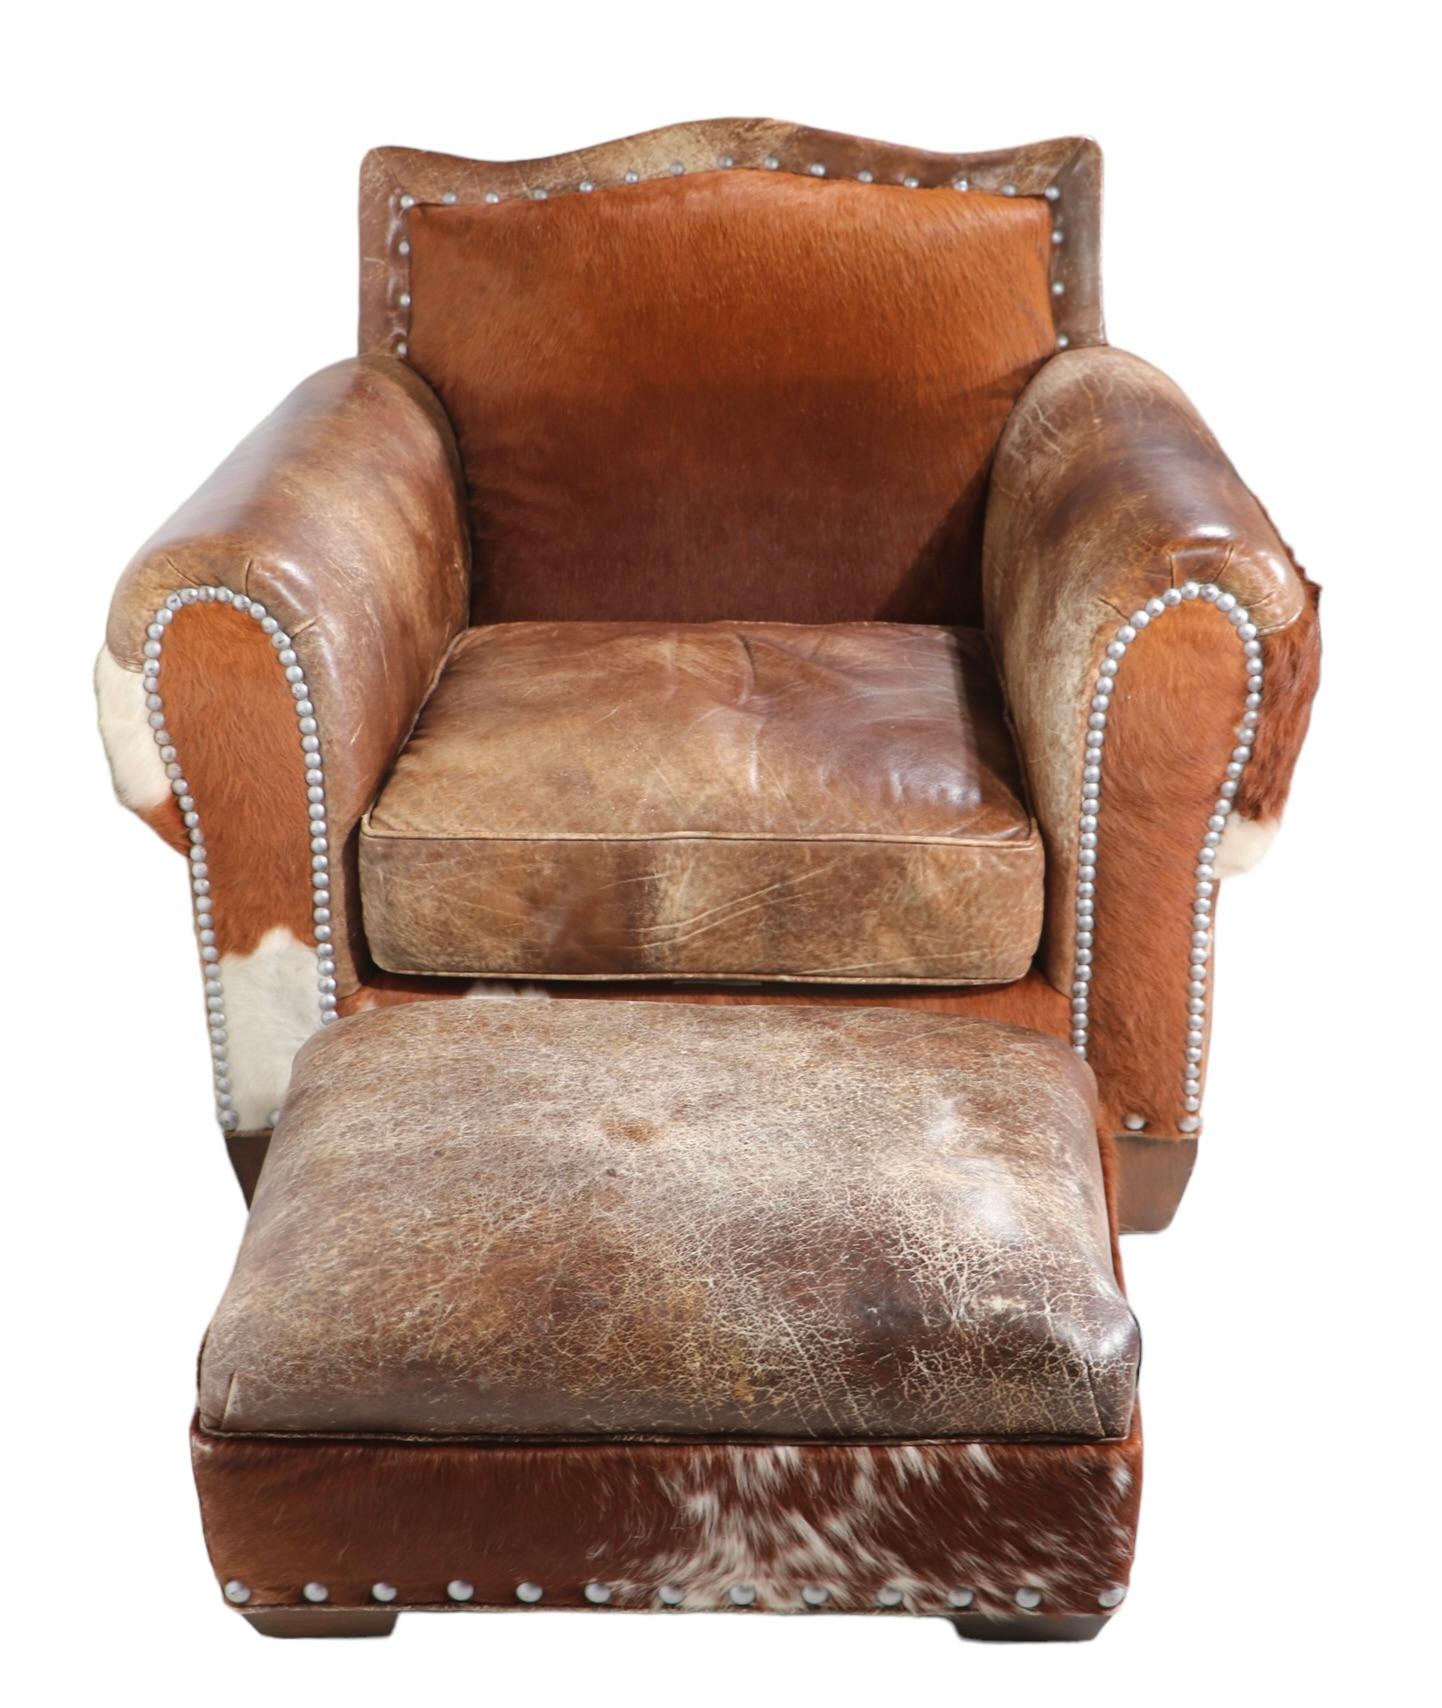 western chair and ottoman